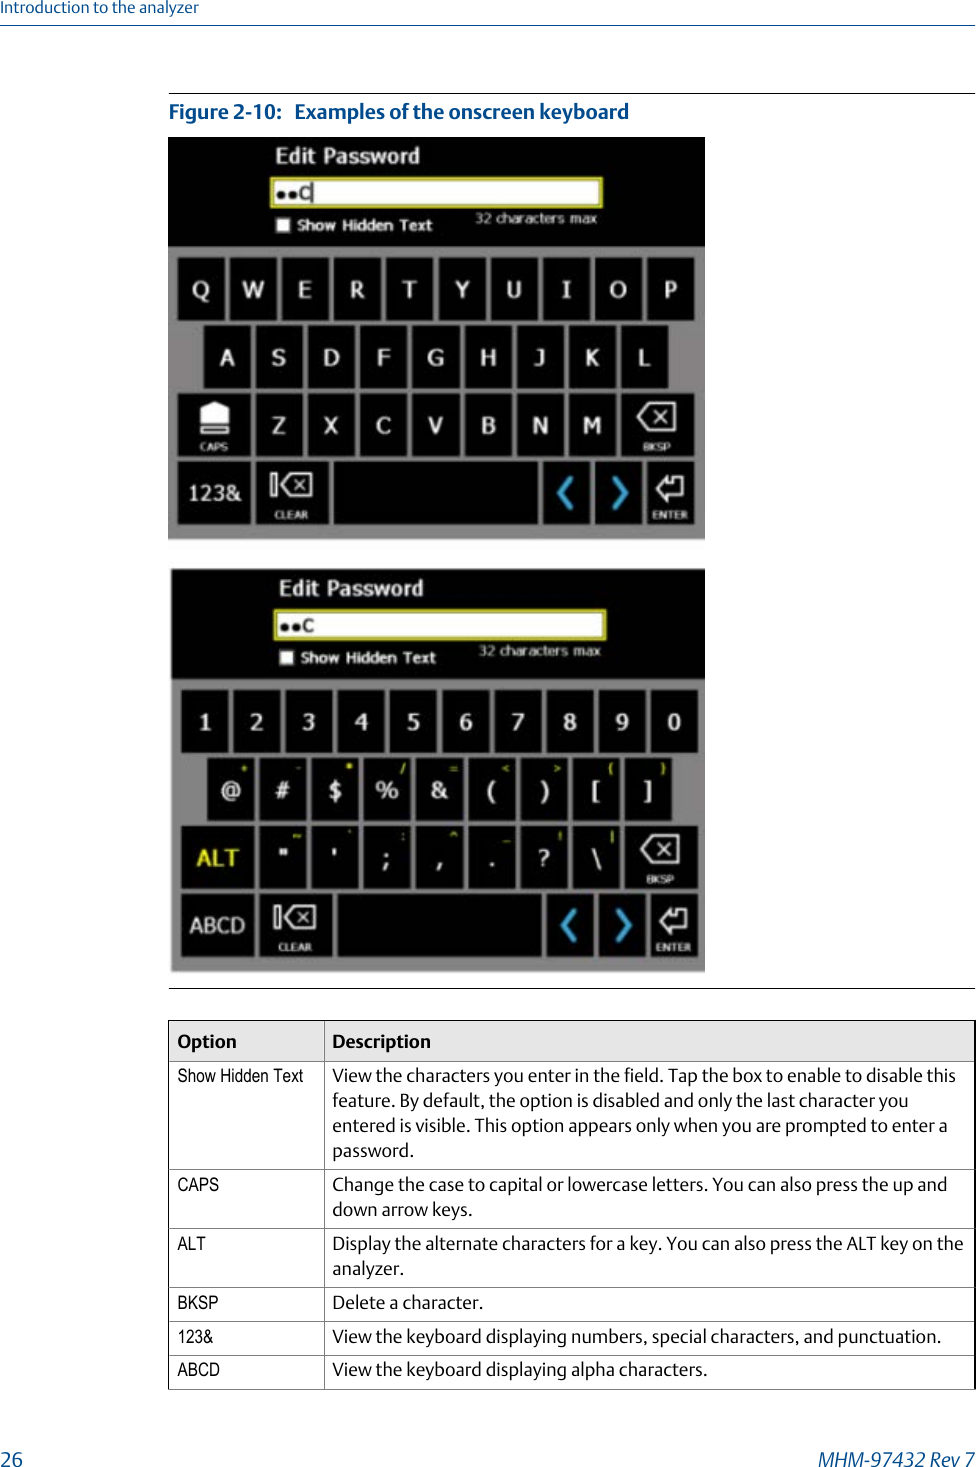 Examples of the onscreen keyboardFigure 2-10:   Option DescriptionShow Hidden Text View the characters you enter in the field. Tap the box to enable to disable thisfeature. By default, the option is disabled and only the last character youentered is visible. This option appears only when you are prompted to enter apassword.CAPS Change the case to capital or lowercase letters. You can also press the up anddown arrow keys.ALT Display the alternate characters for a key. You can also press the ALT key on theanalyzer.BKSP Delete a character.123&amp; View the keyboard displaying numbers, special characters, and punctuation.ABCD View the keyboard displaying alpha characters.Introduction to the analyzer26 MHM-97432 Rev 7